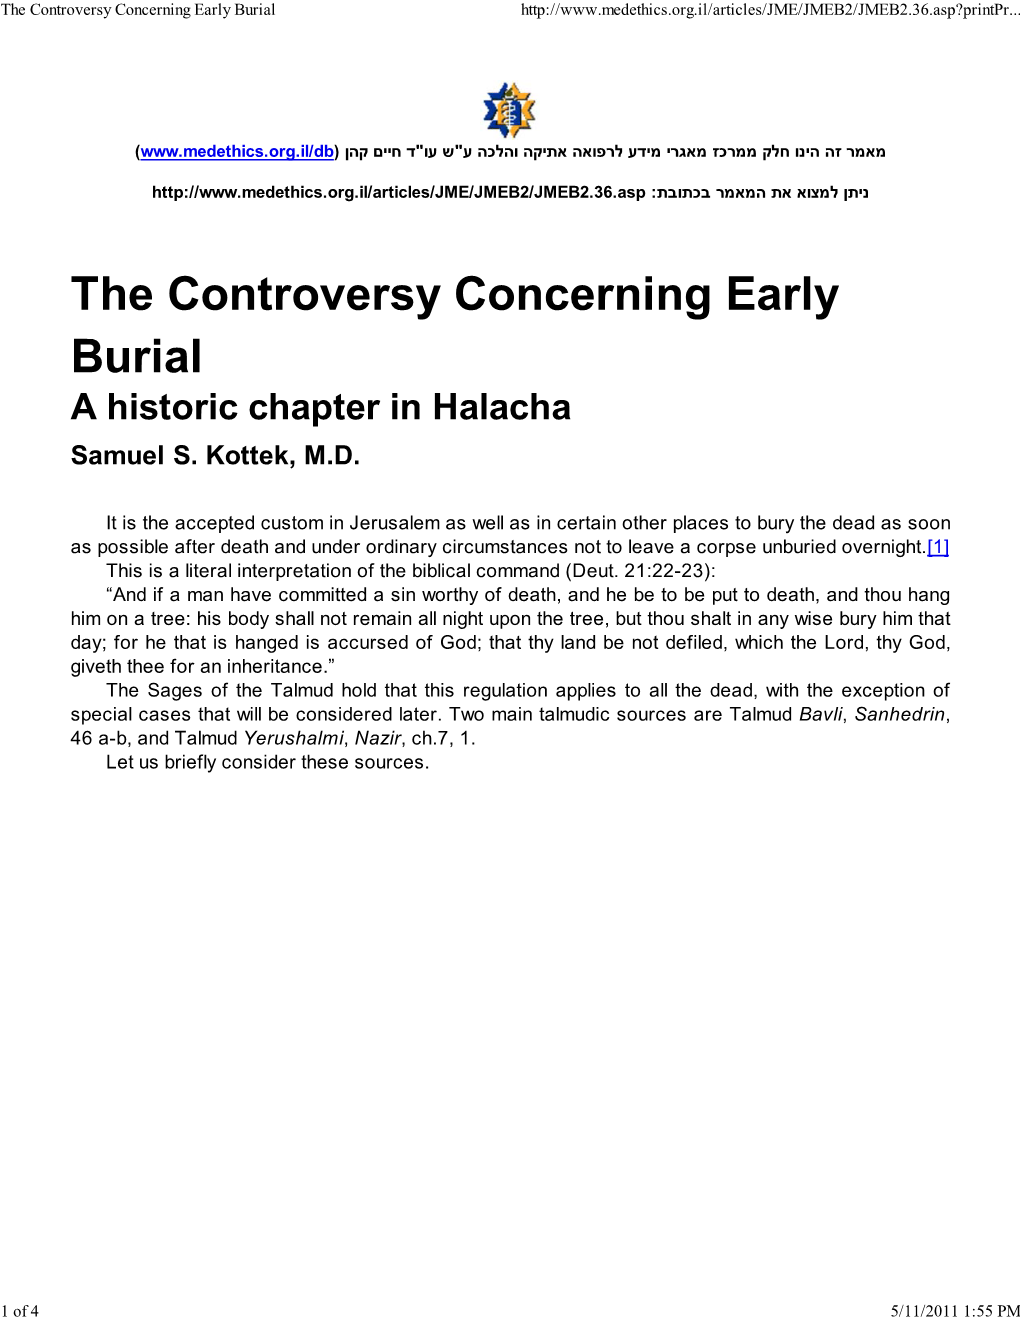 The Controversy Concerning Early Burial